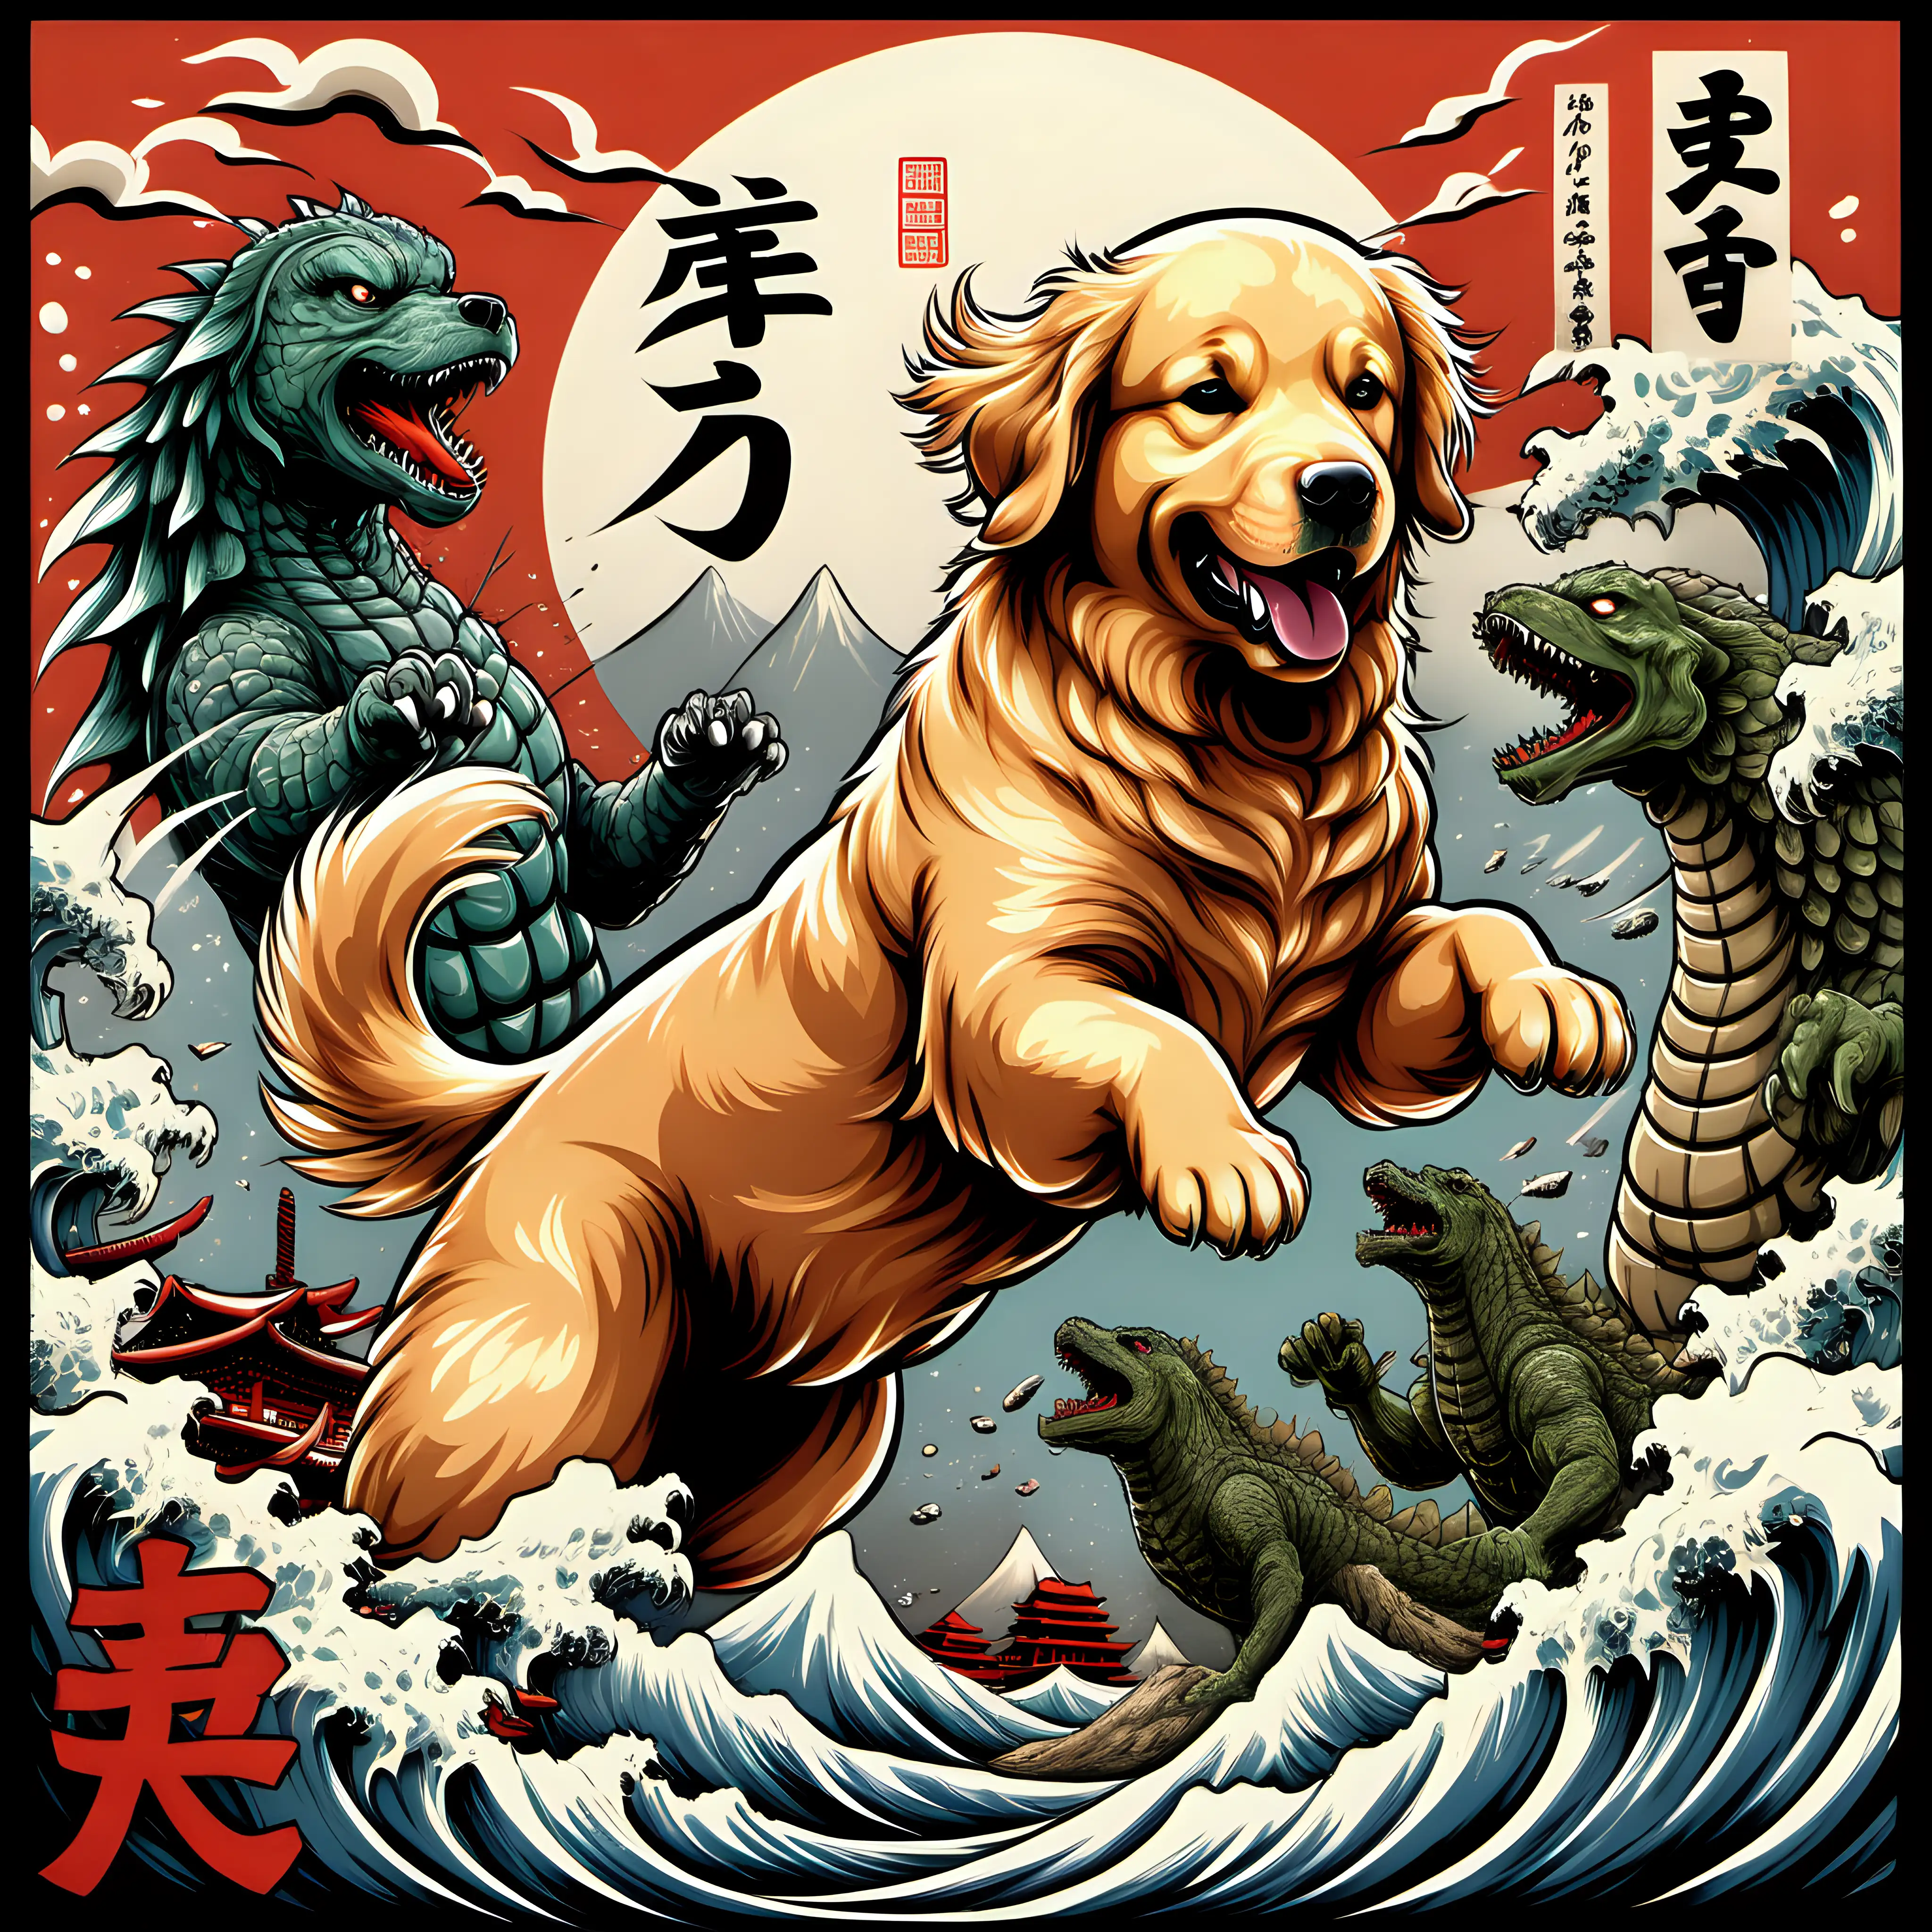 Golden retriever fighting godzilla in the  art style of an ancient Japanese motif with some Japanese writing